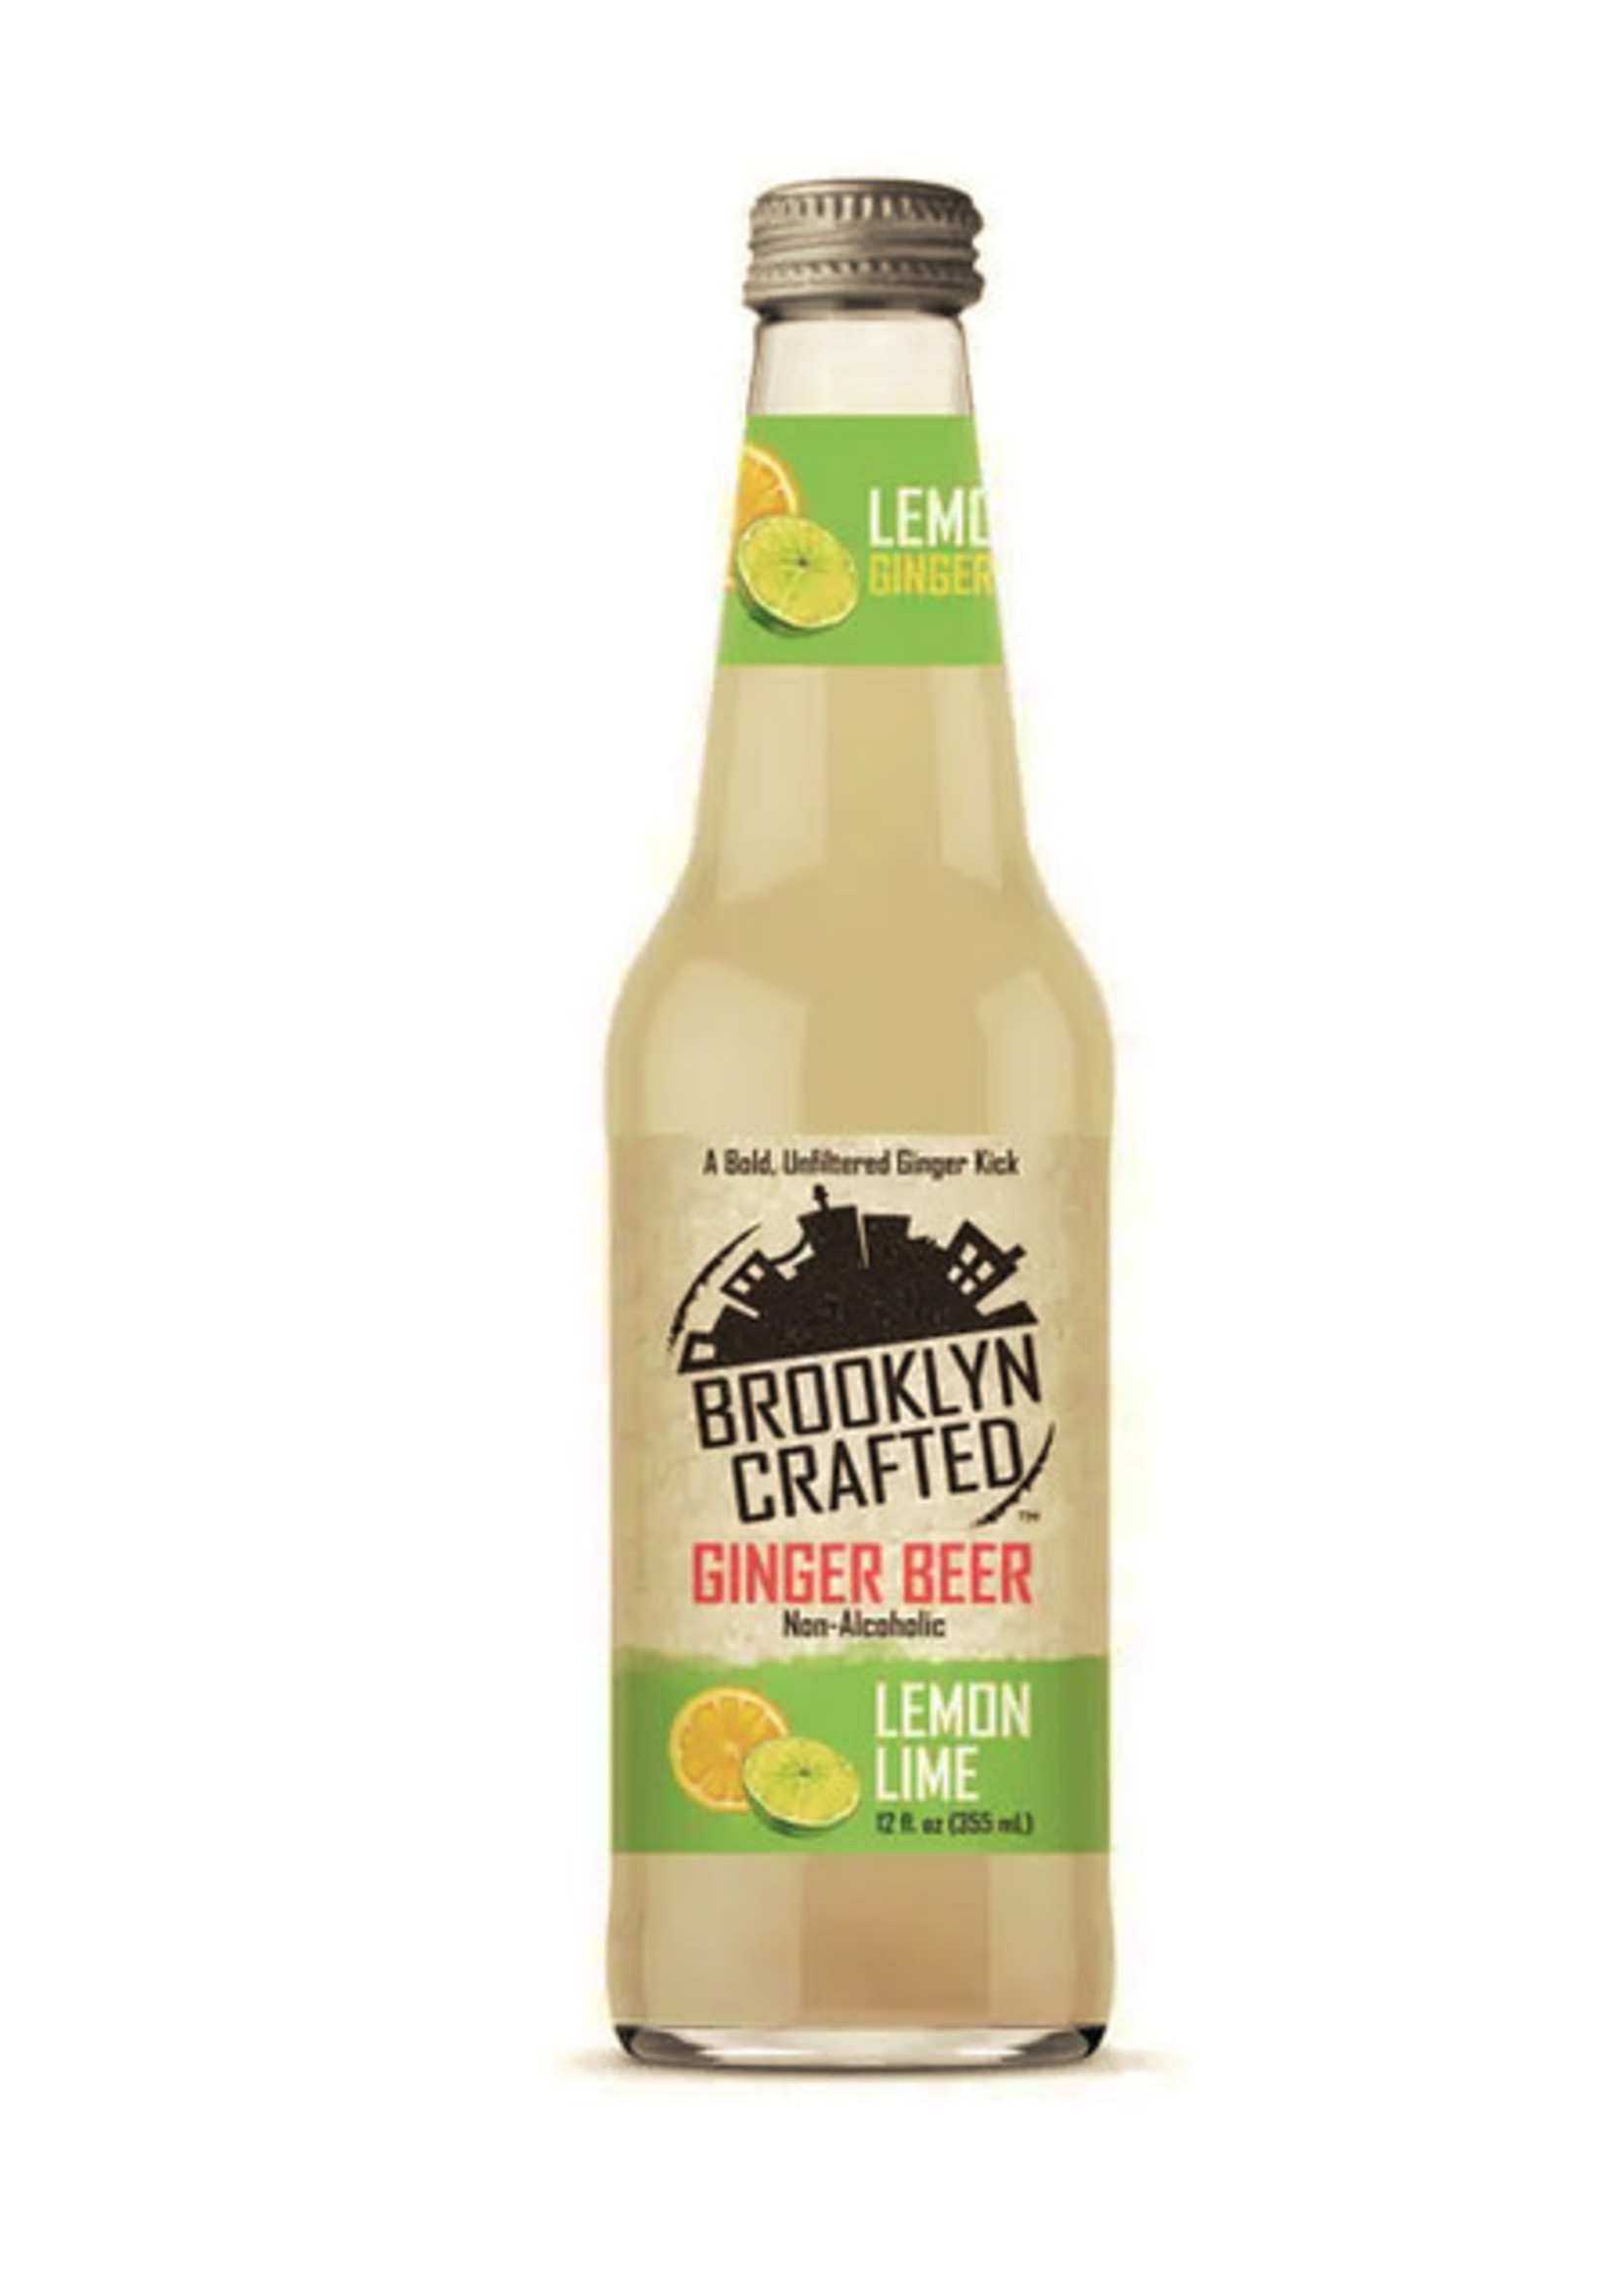 Brooklyn Crafted Brooklyn Crafted, Ginger Beer, Lemon LIme, 12oz bottle